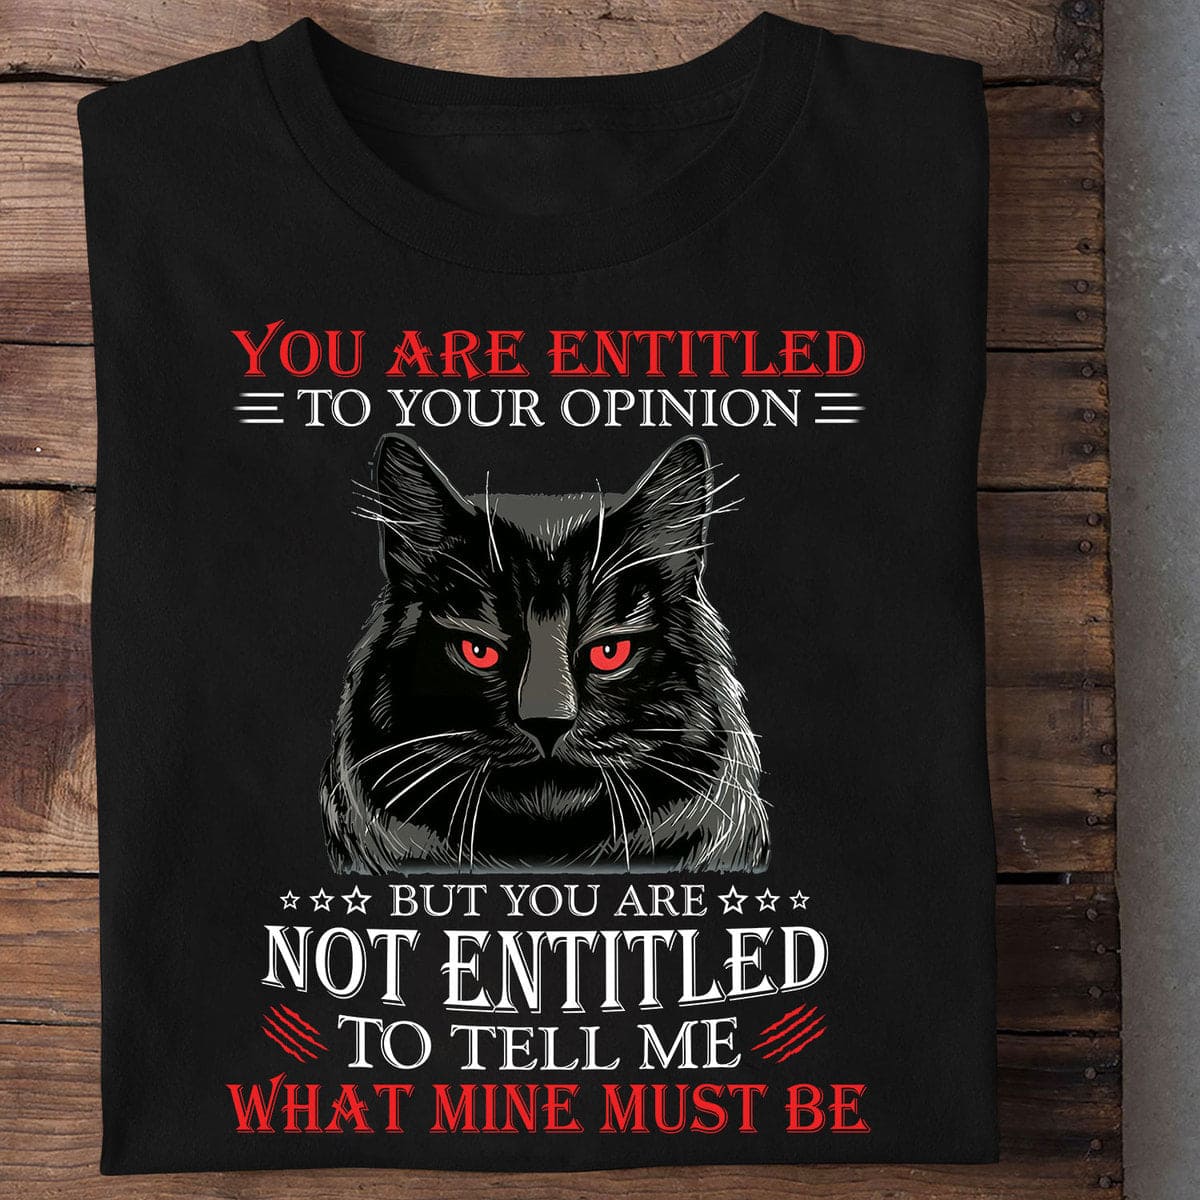 You are entitled to your opinion but you are not entitled to tell me what mine must be - Black cat graphic T-shirt